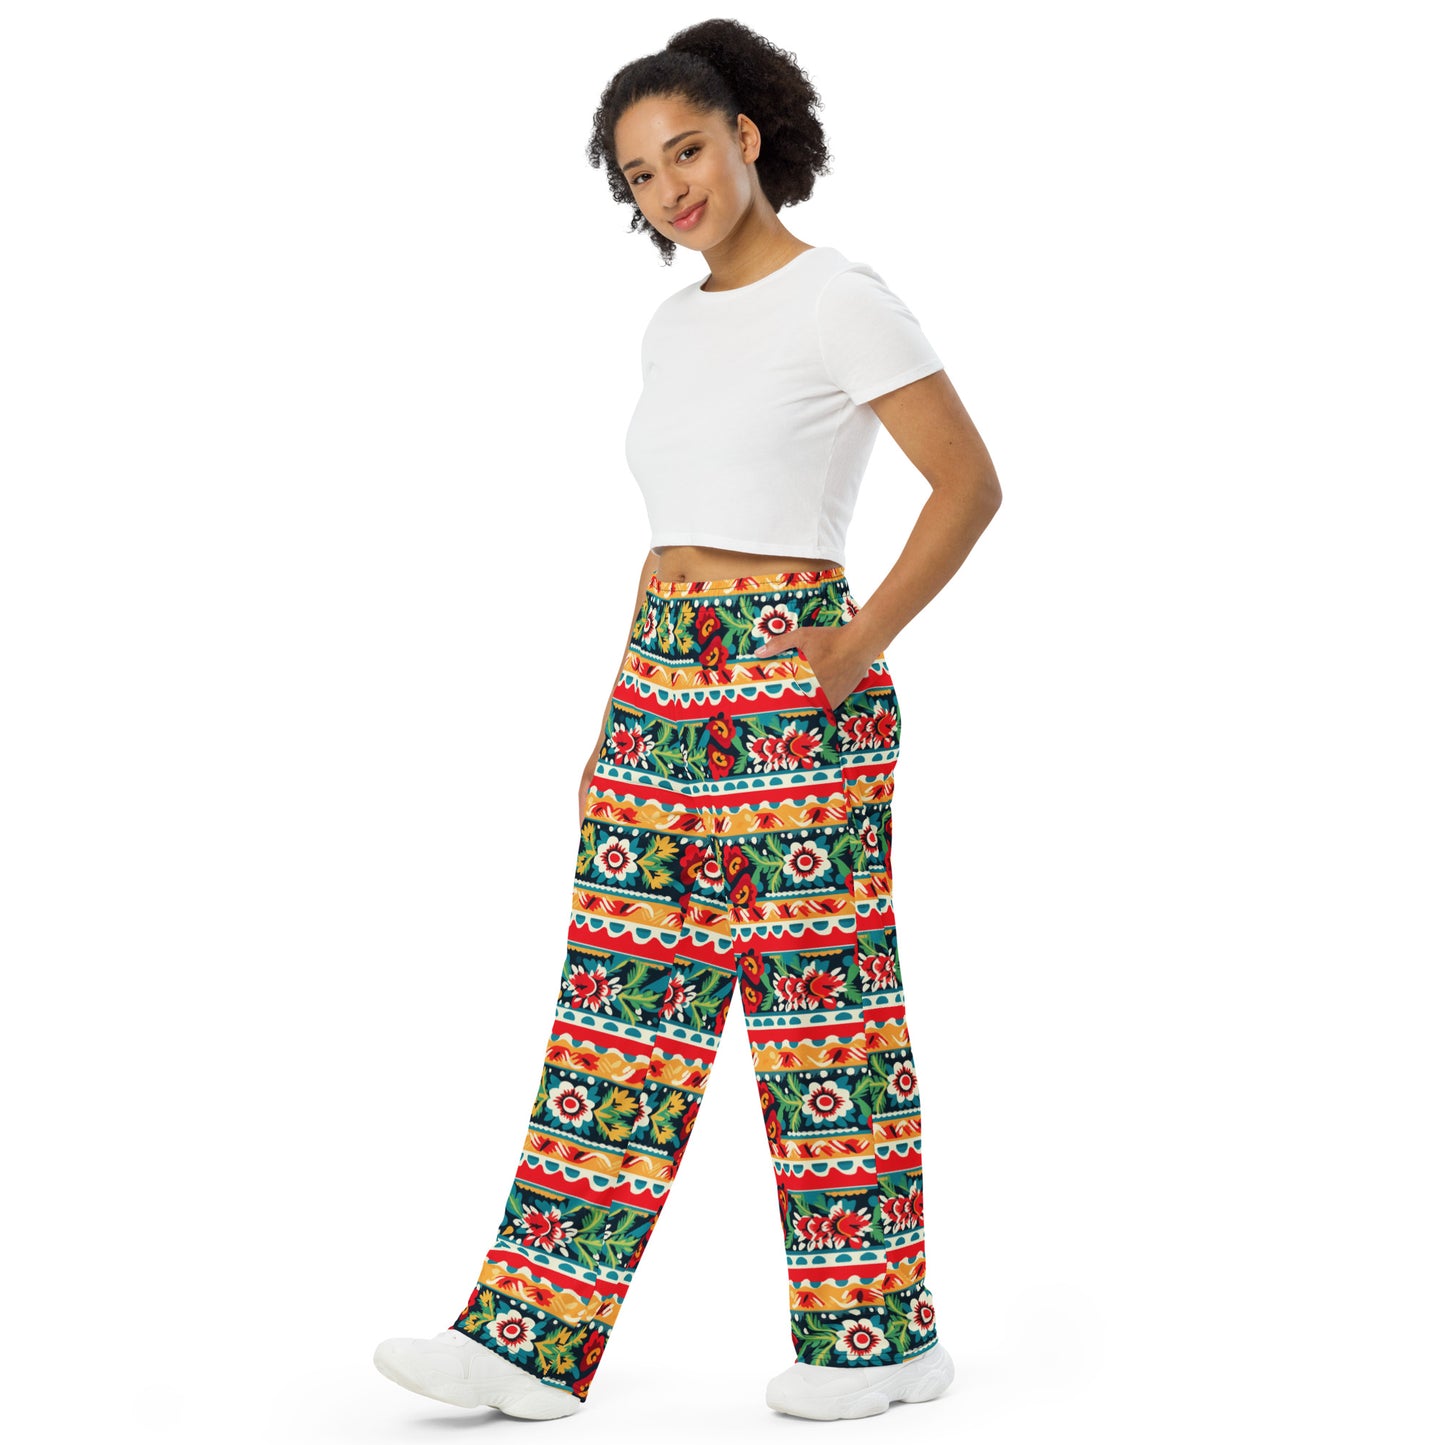 Shades of Red & Green Super Soft Pajamas / Sweat Bottoms